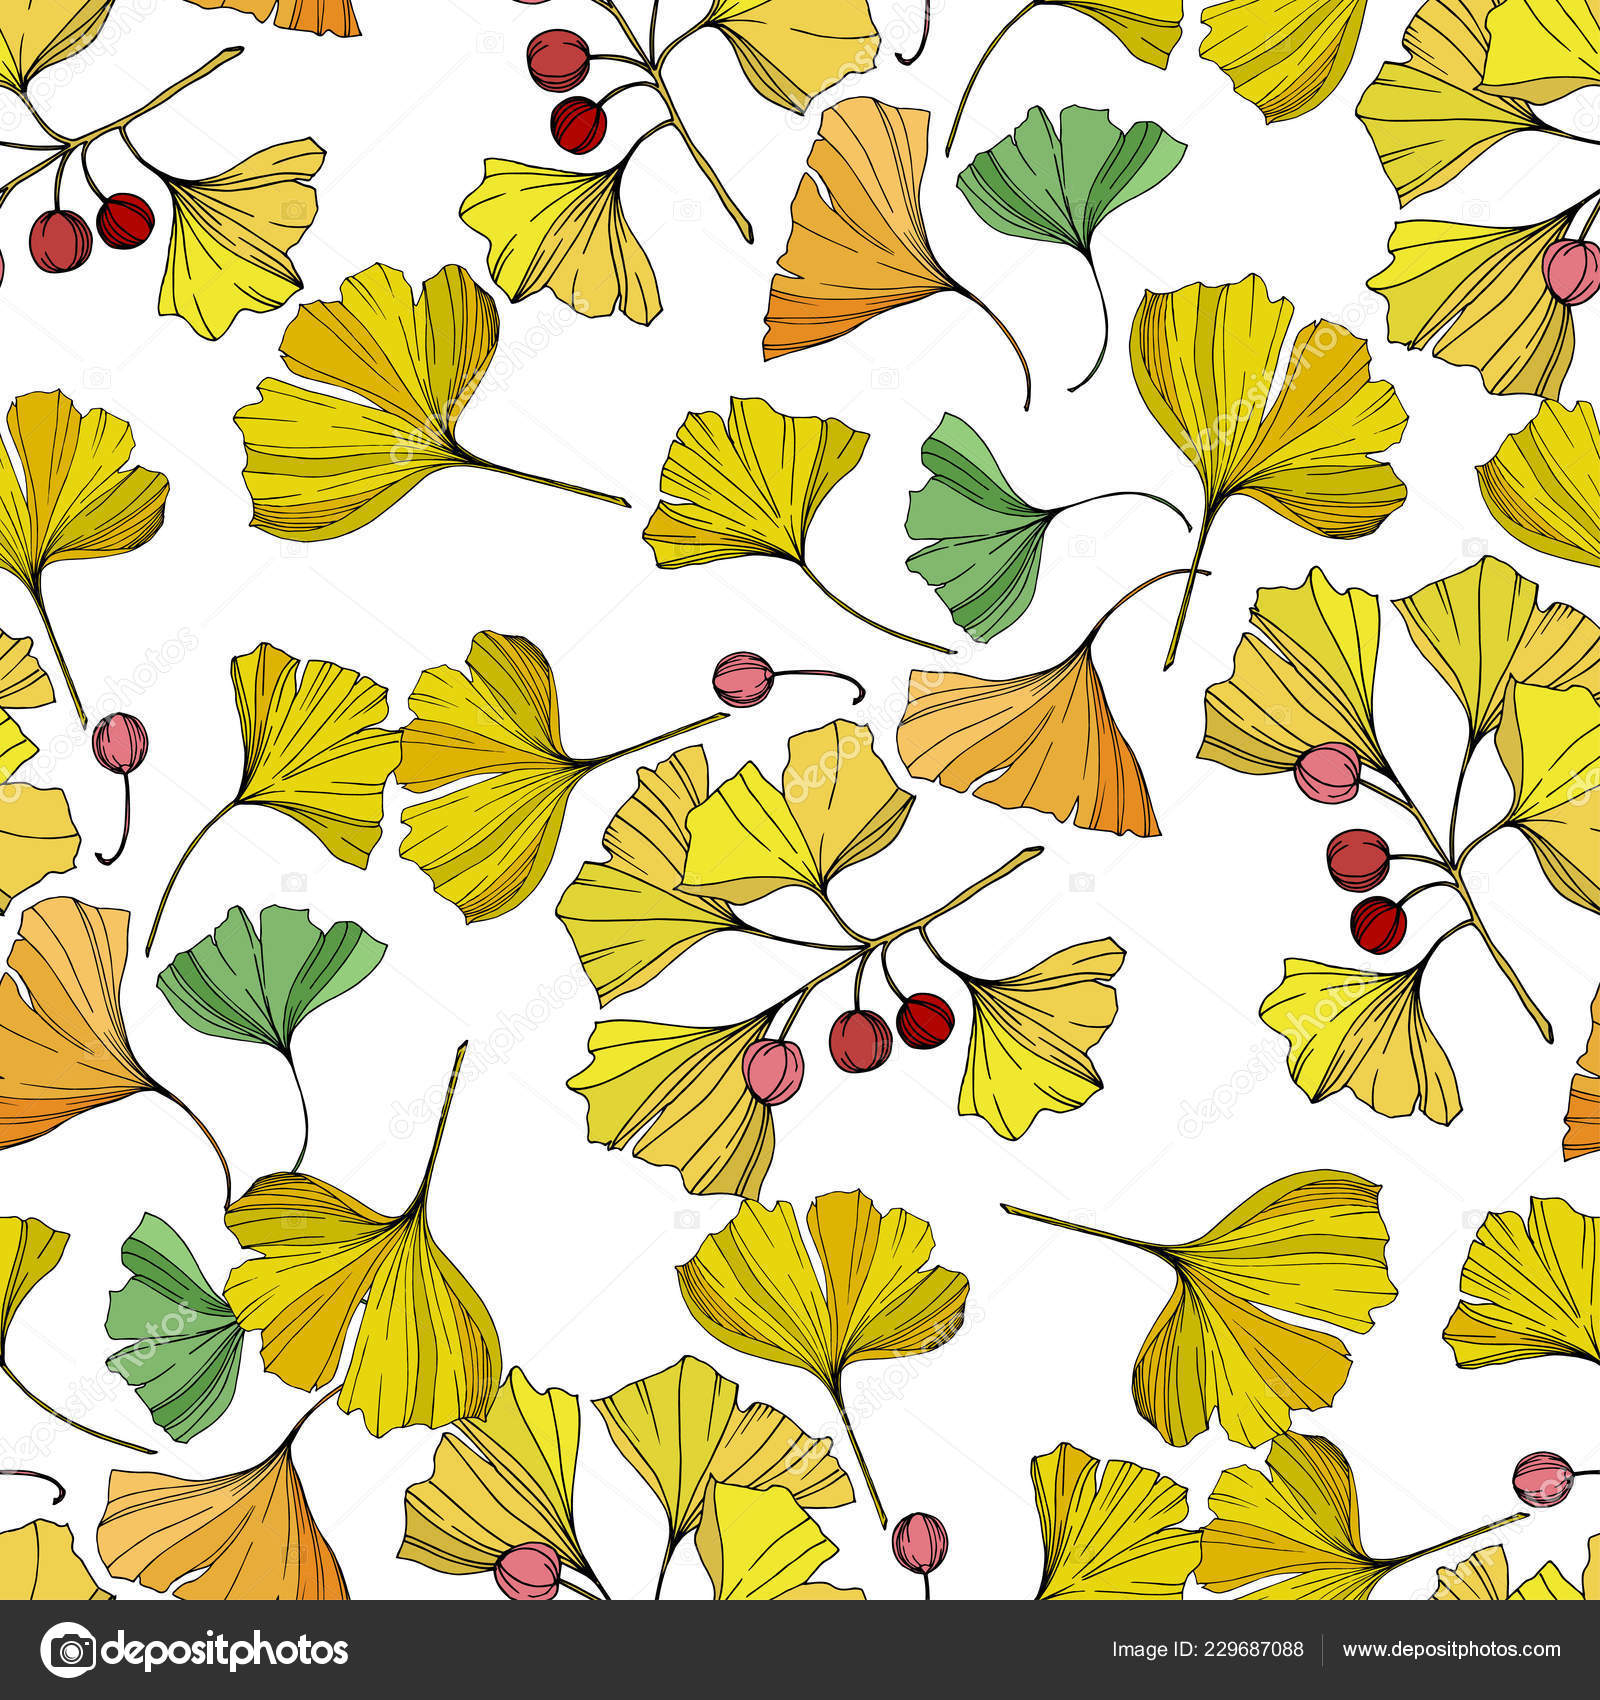 Vector. Ginkgo leaf. Seamless background pattern. Fabric wallpaper